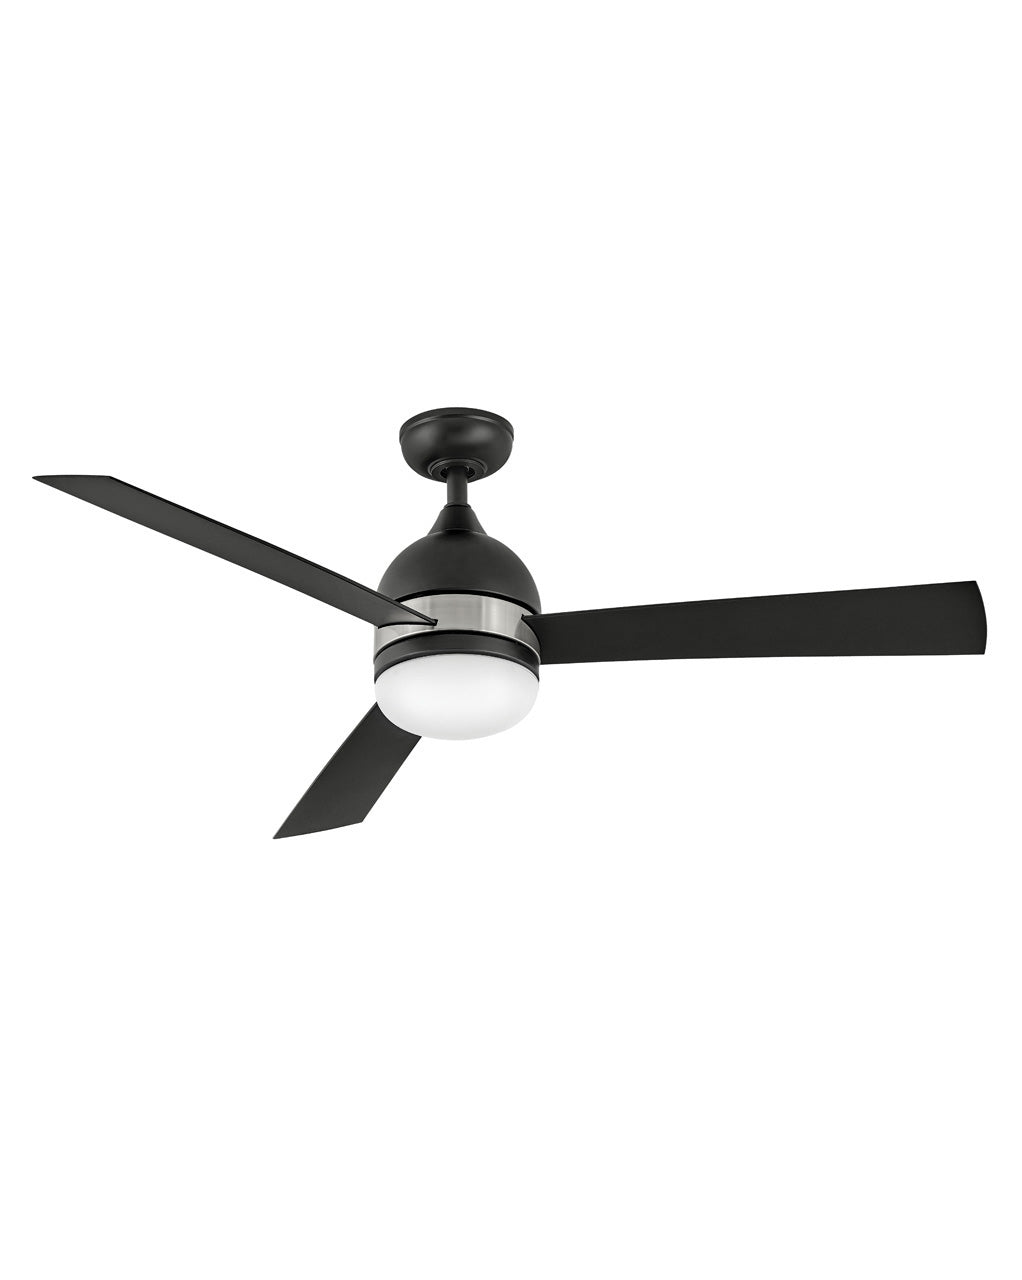 Hinkley Verge 52" LED 902352 Ceiling Fan Hinkley Matte Black with brushed nickel accent  